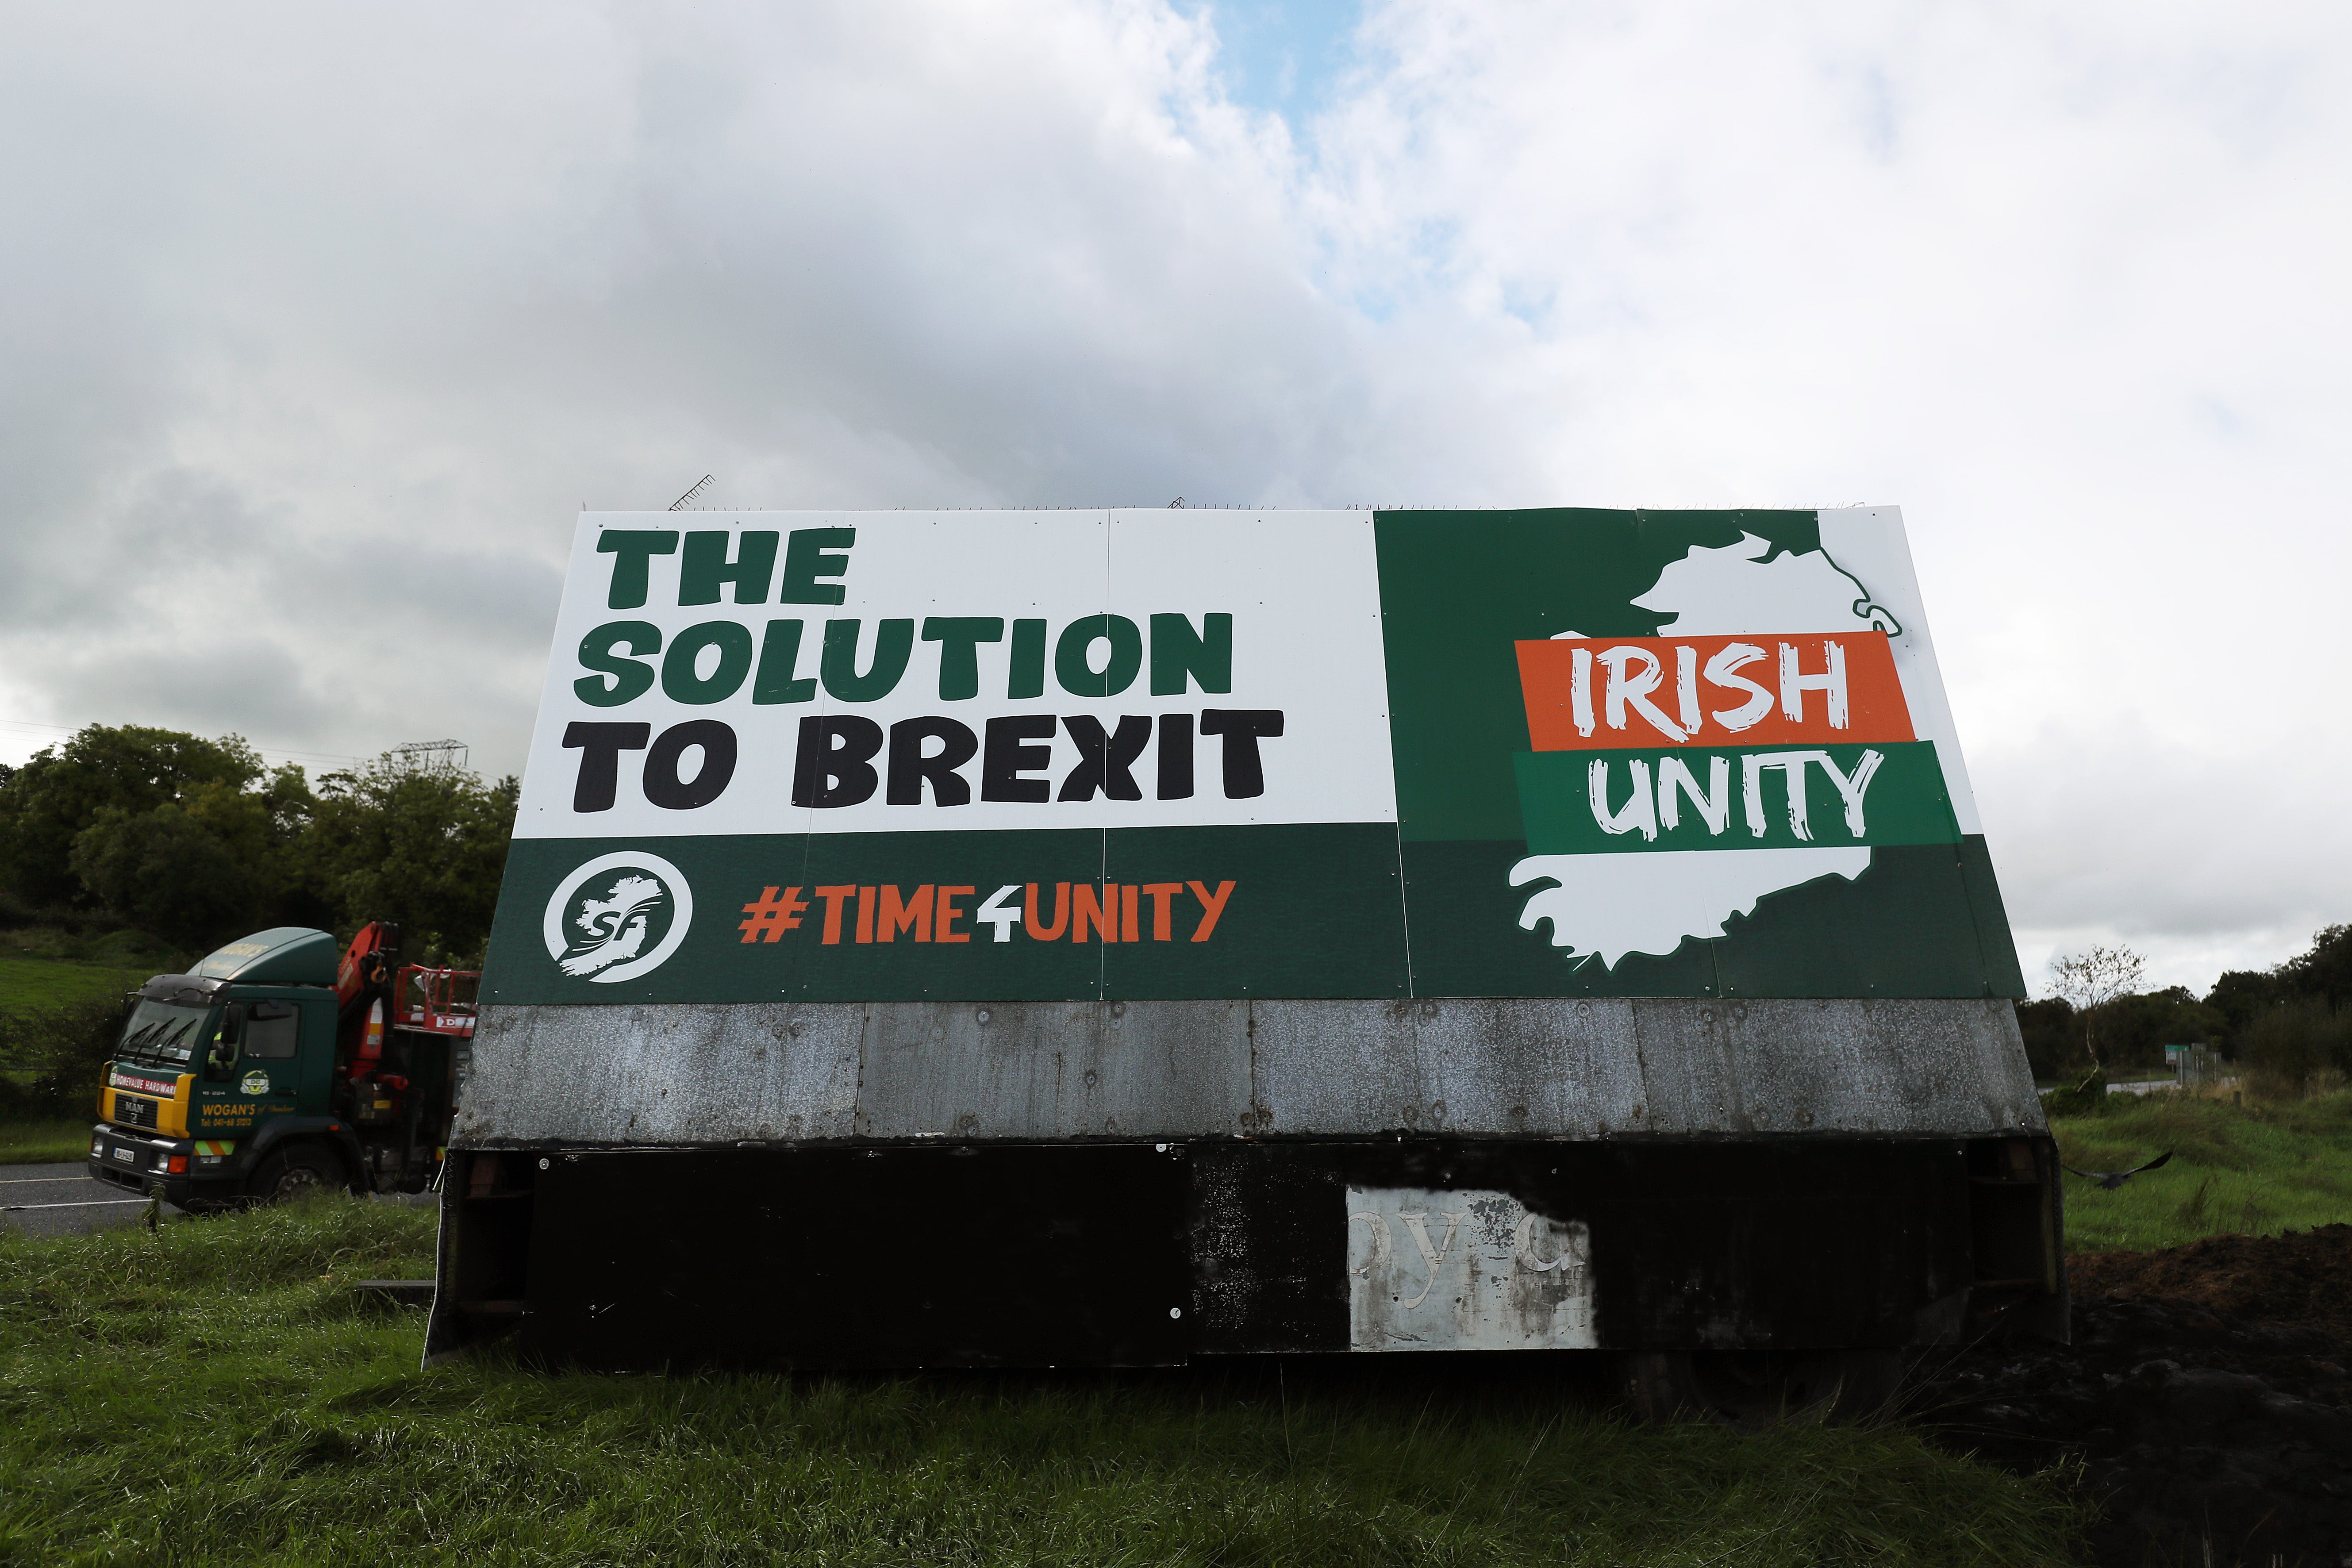 A Sinn Fein poster proposing Irish unity as a solution to Brexit (Brian Lawless/PA)